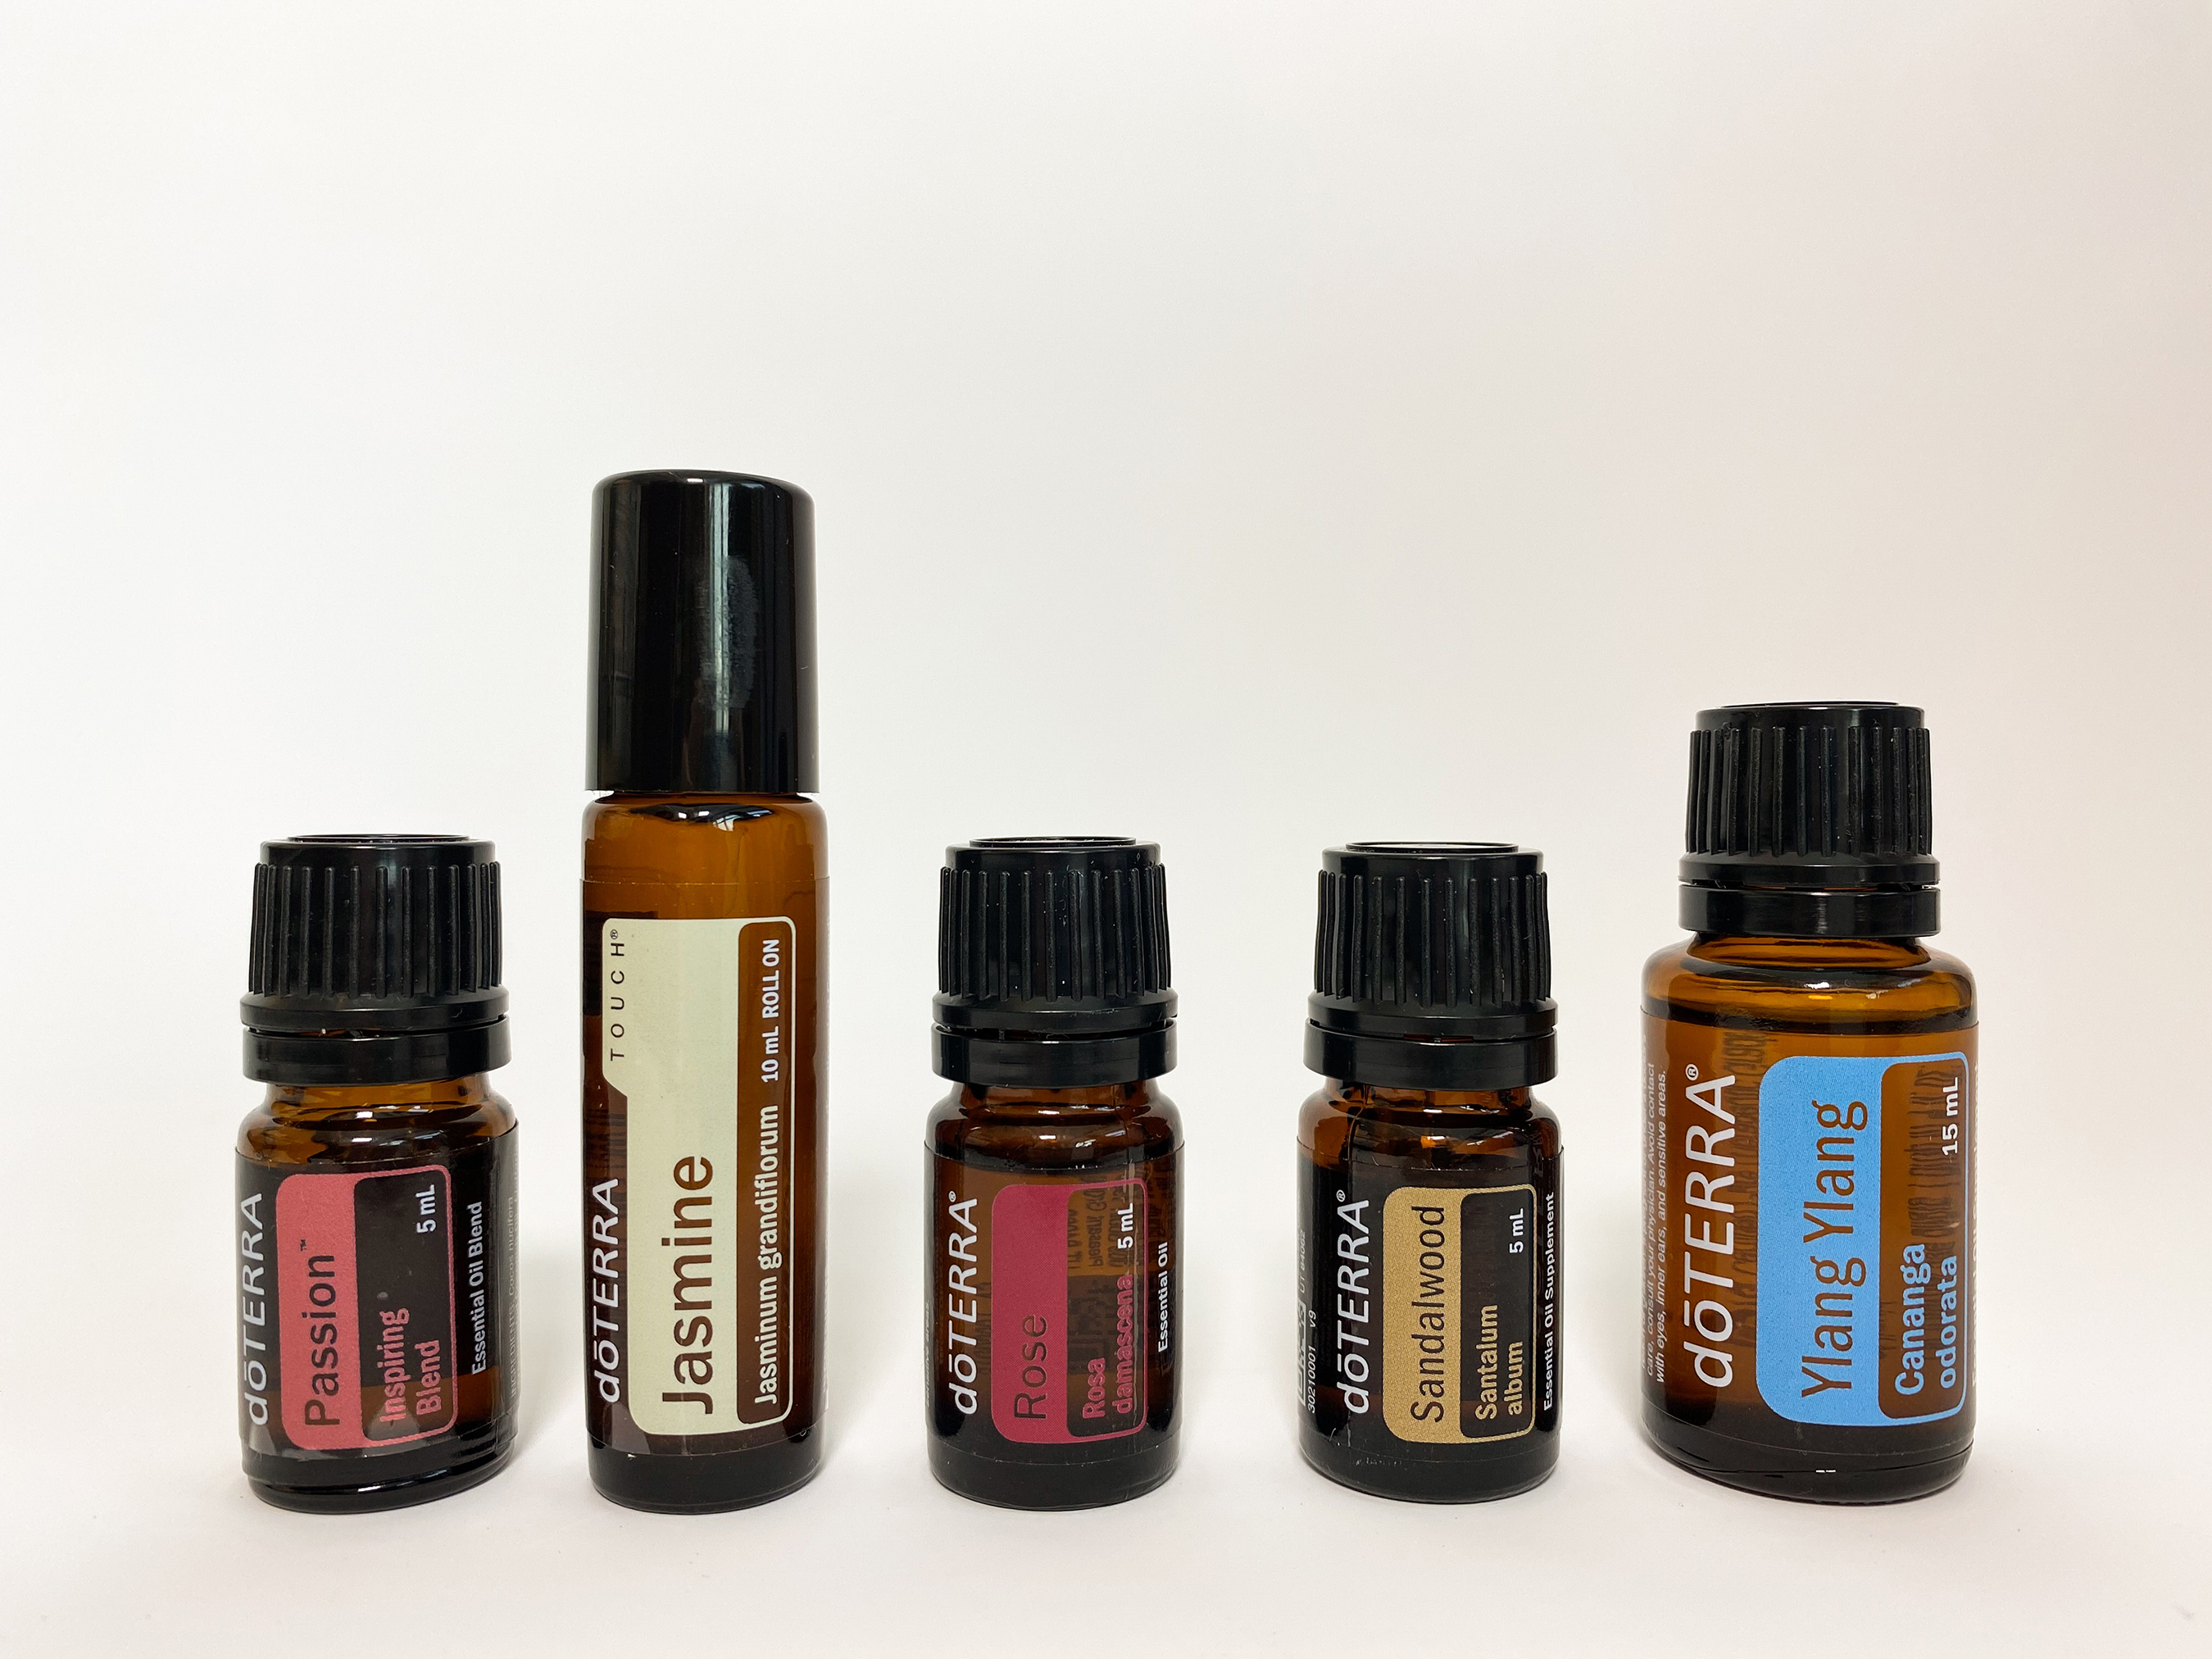 Five essential oils to show that special someone how well you know them.